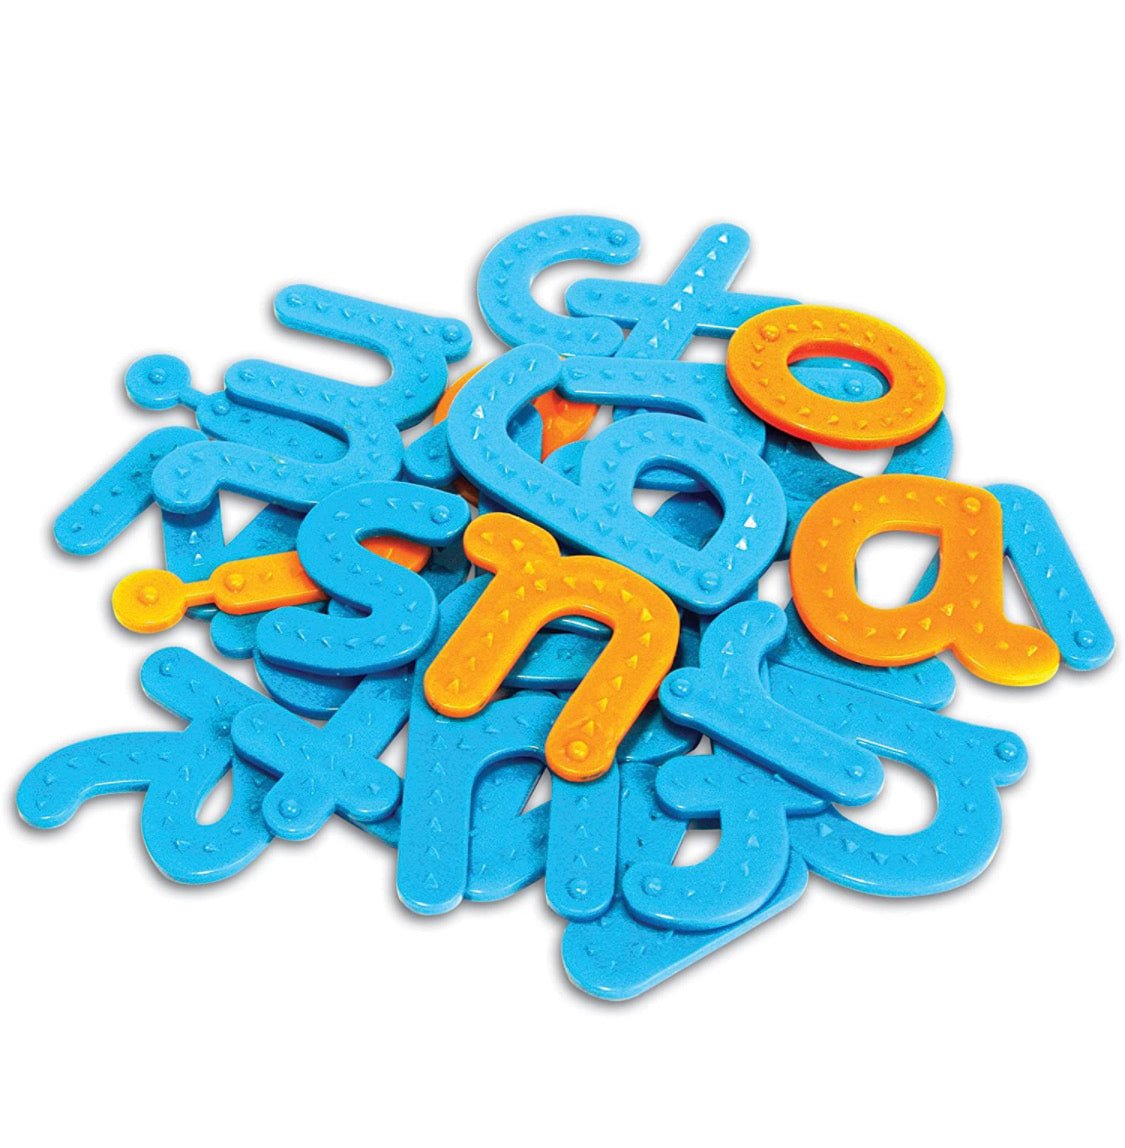 Tactile Letter Set | Learning and Exploring Through Play